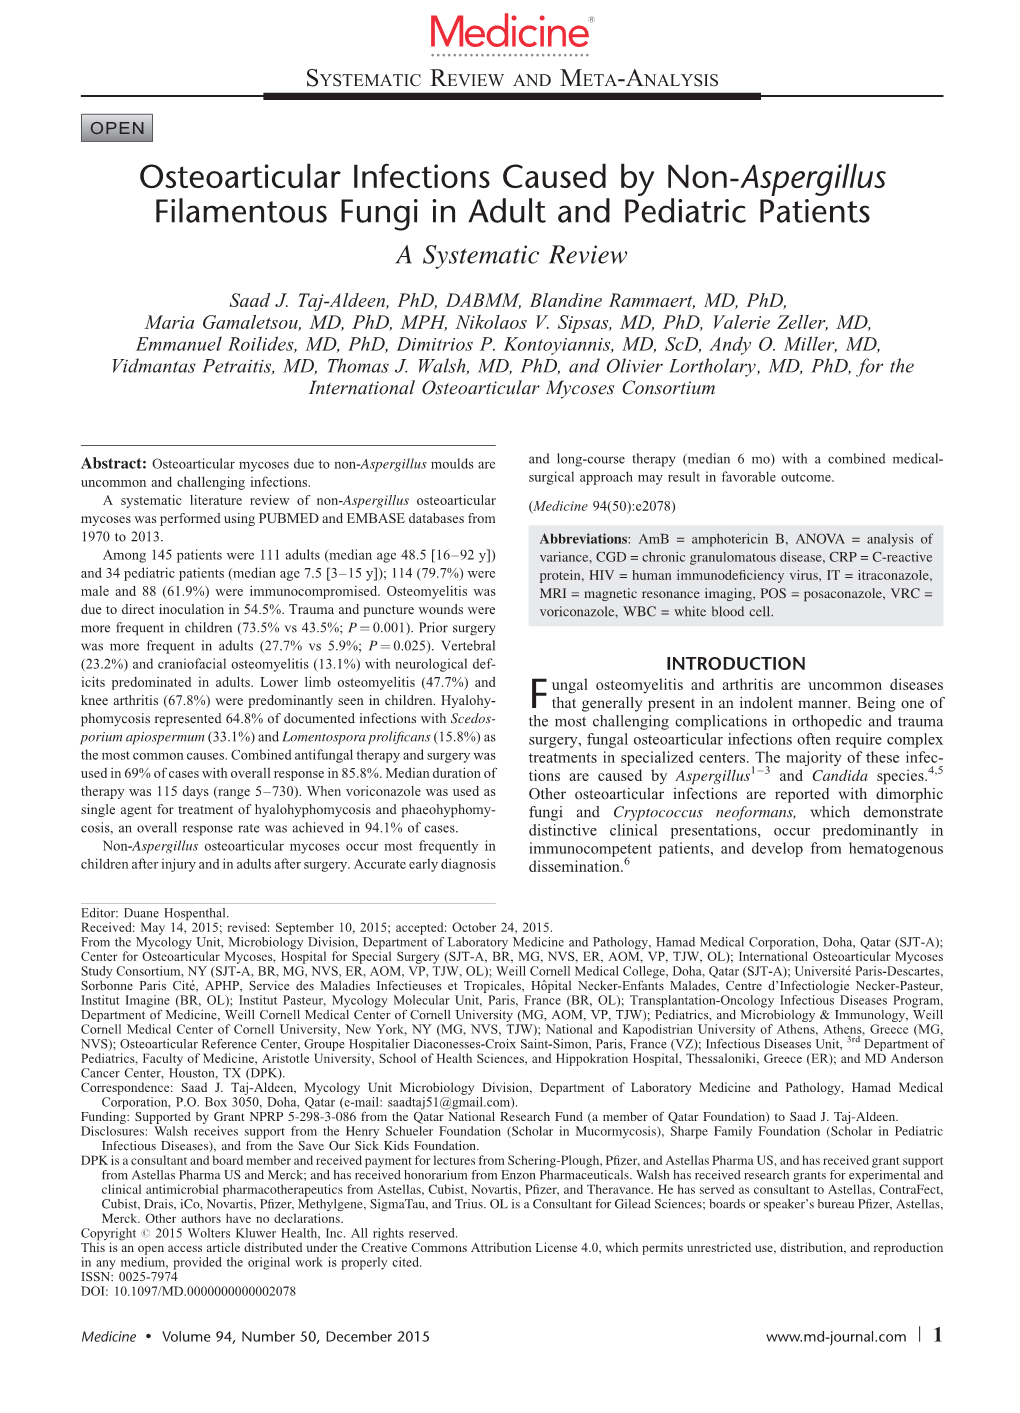 Osteoarticular Infections Caused by Non-Aspergillus Filamentous Fungi in Adult and Pediatric Patients a Systematic Review